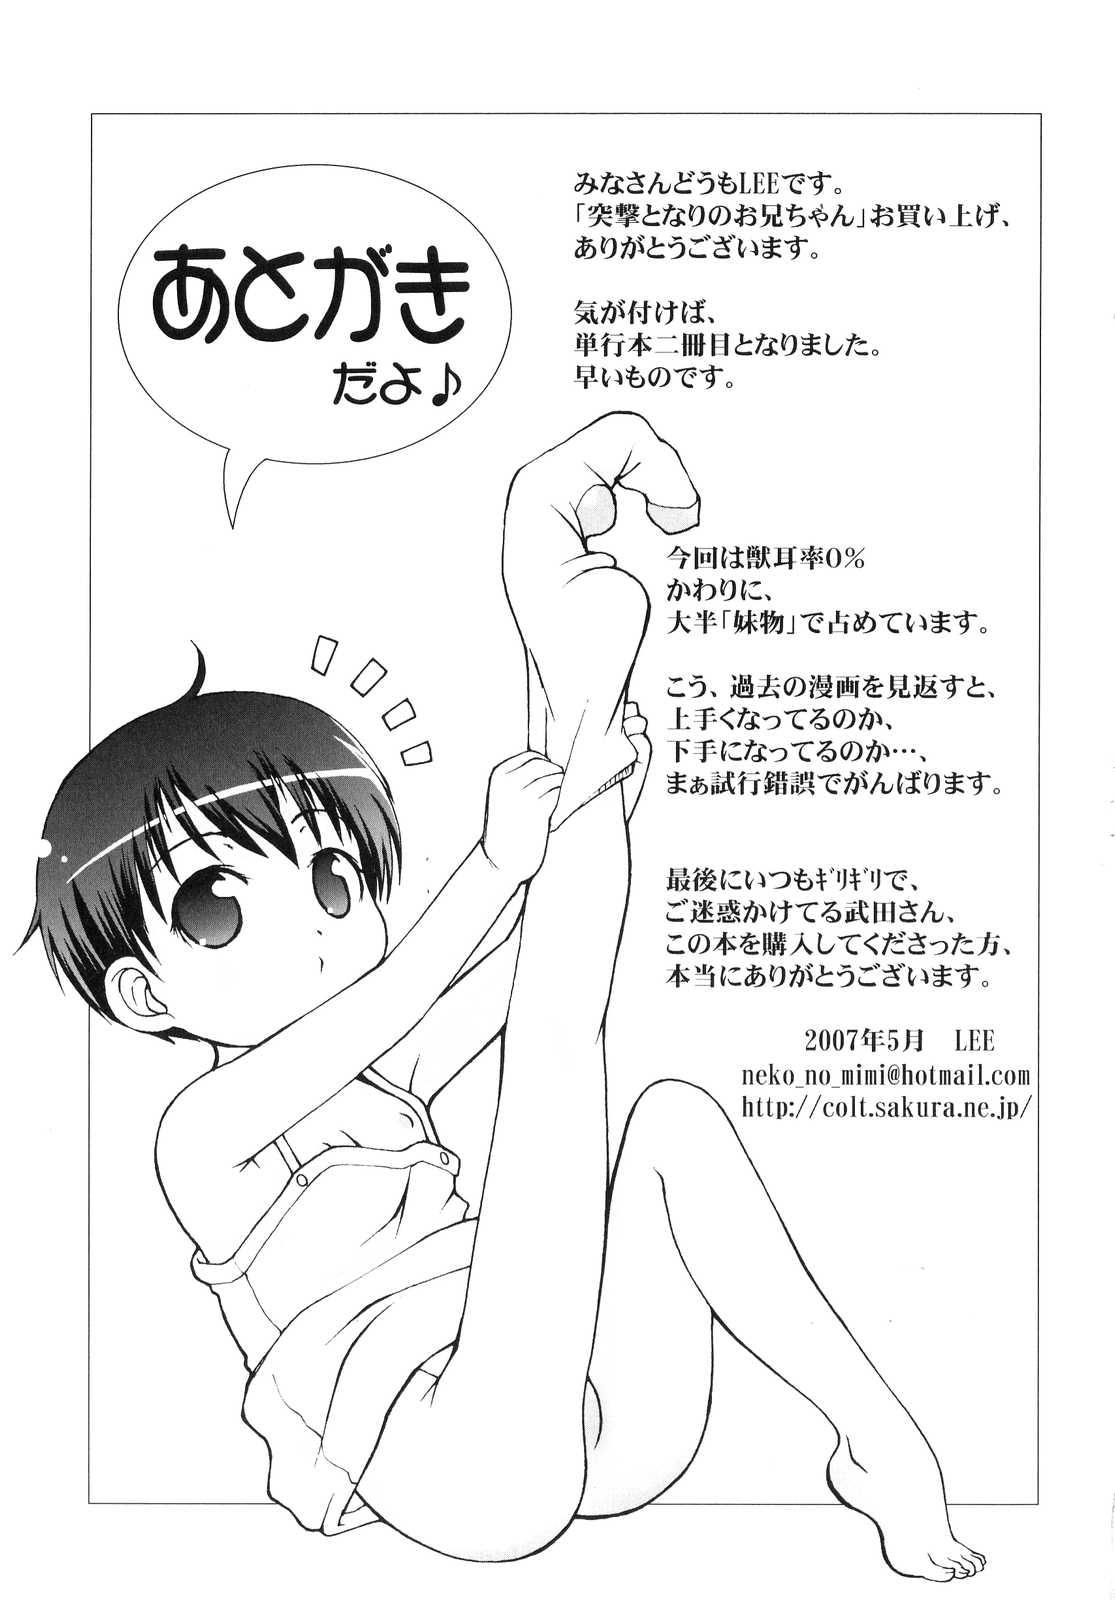 Bdsm [LEE] Totsugeki Tonari no Onii-chan - Charge the Brother of neighboring house Liveshow - Page 186